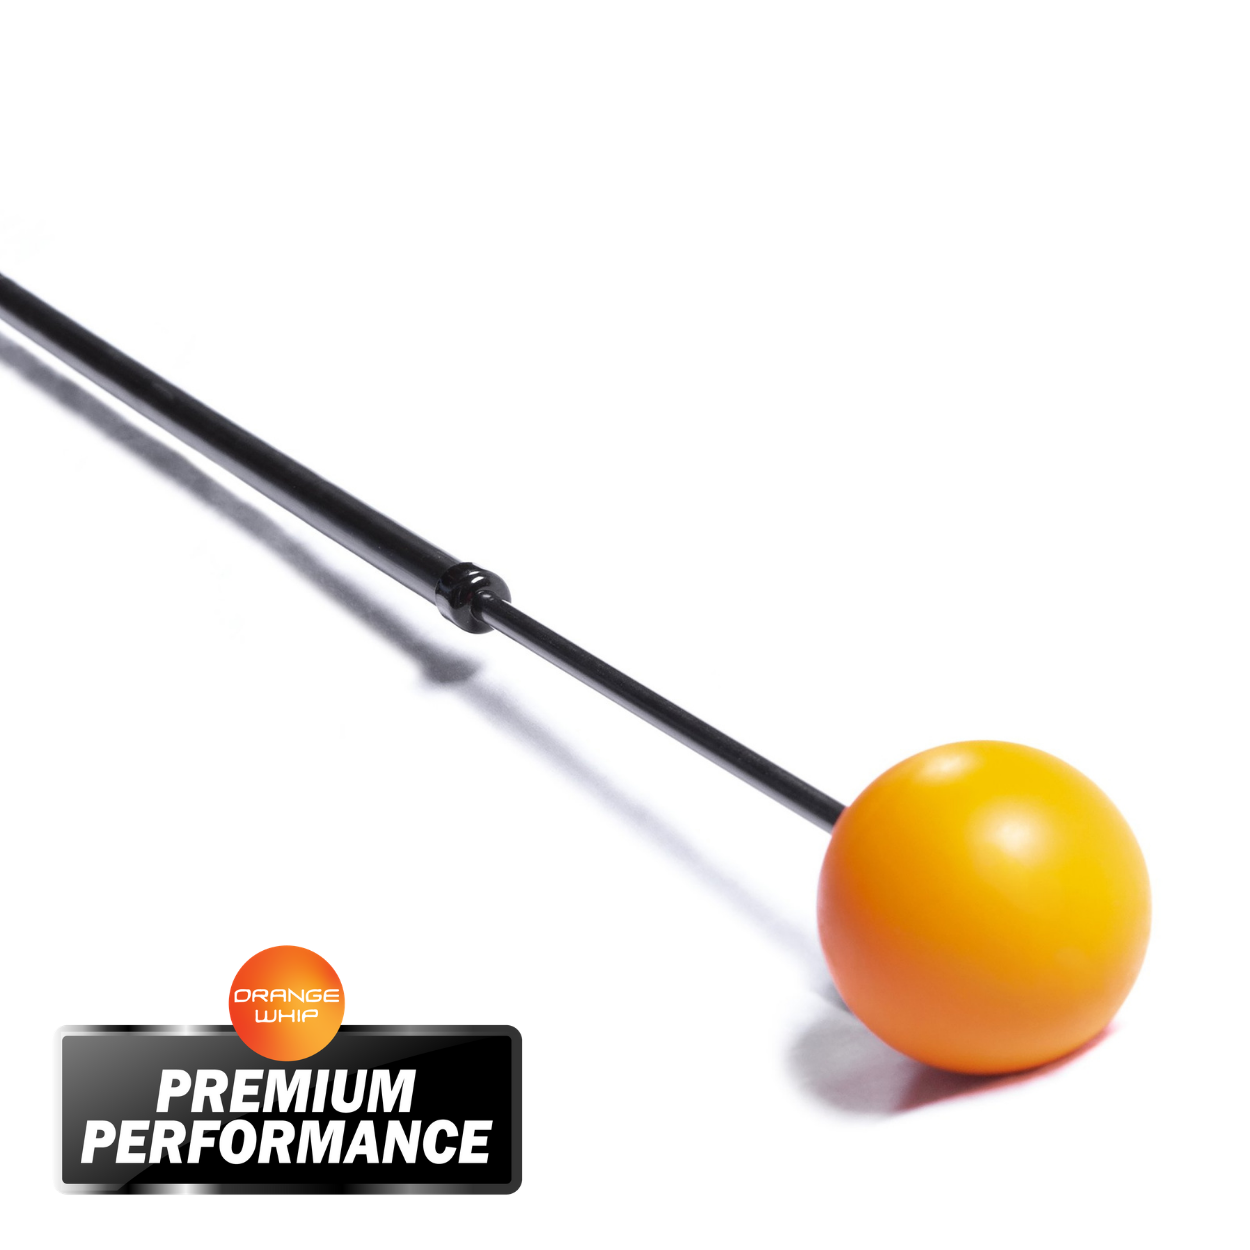 Orange Whip Trainer (Mens 47.5", 1.76 lbs) Golf Swing Trainer NEW - image 1 of 6